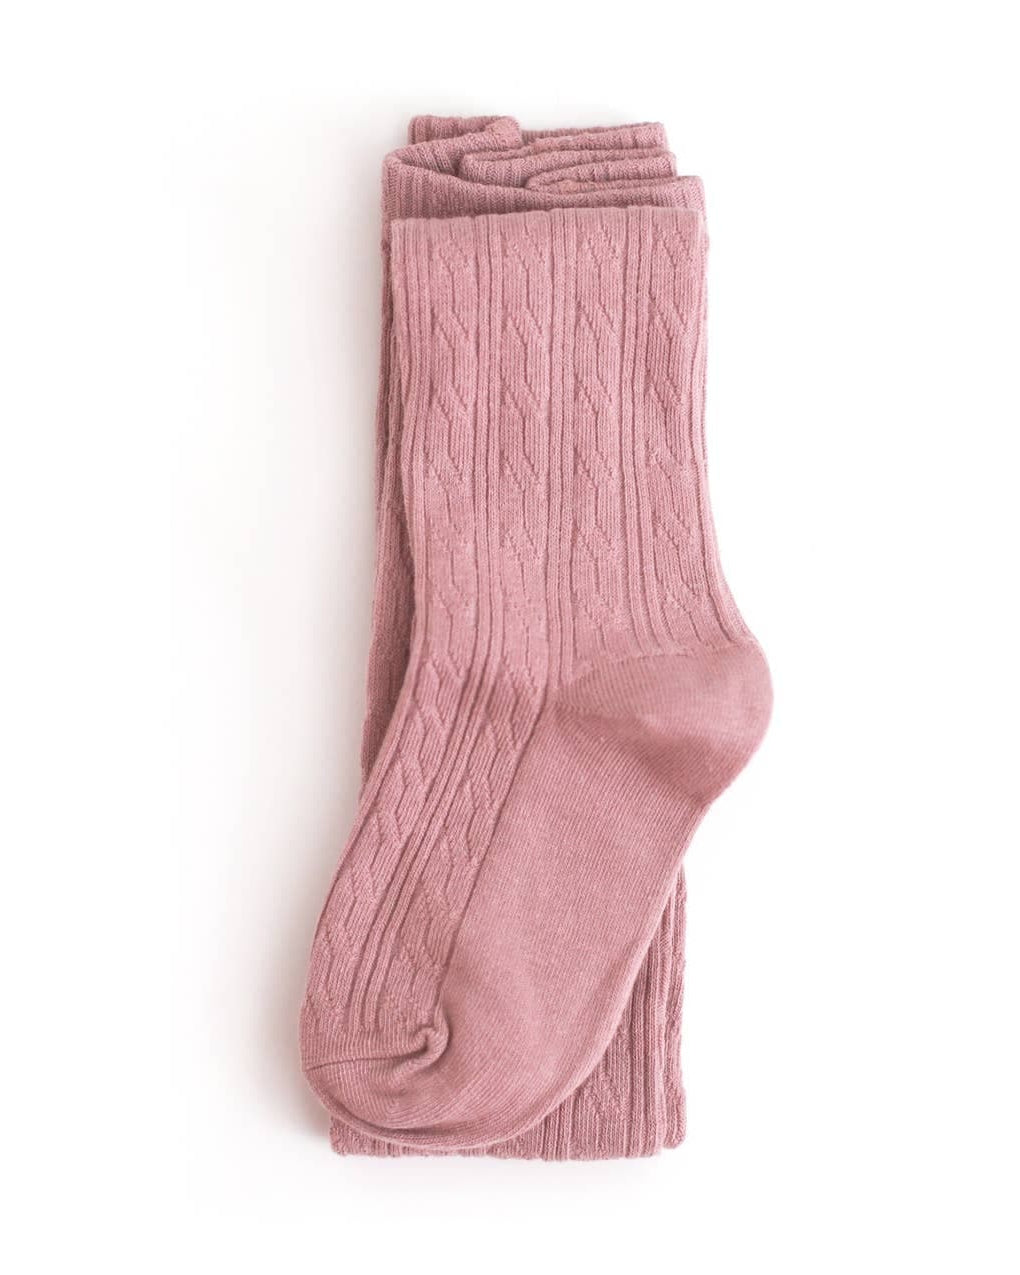 Dusty Rose Cable Knit tight  A Touch of Magnolia Boutique   